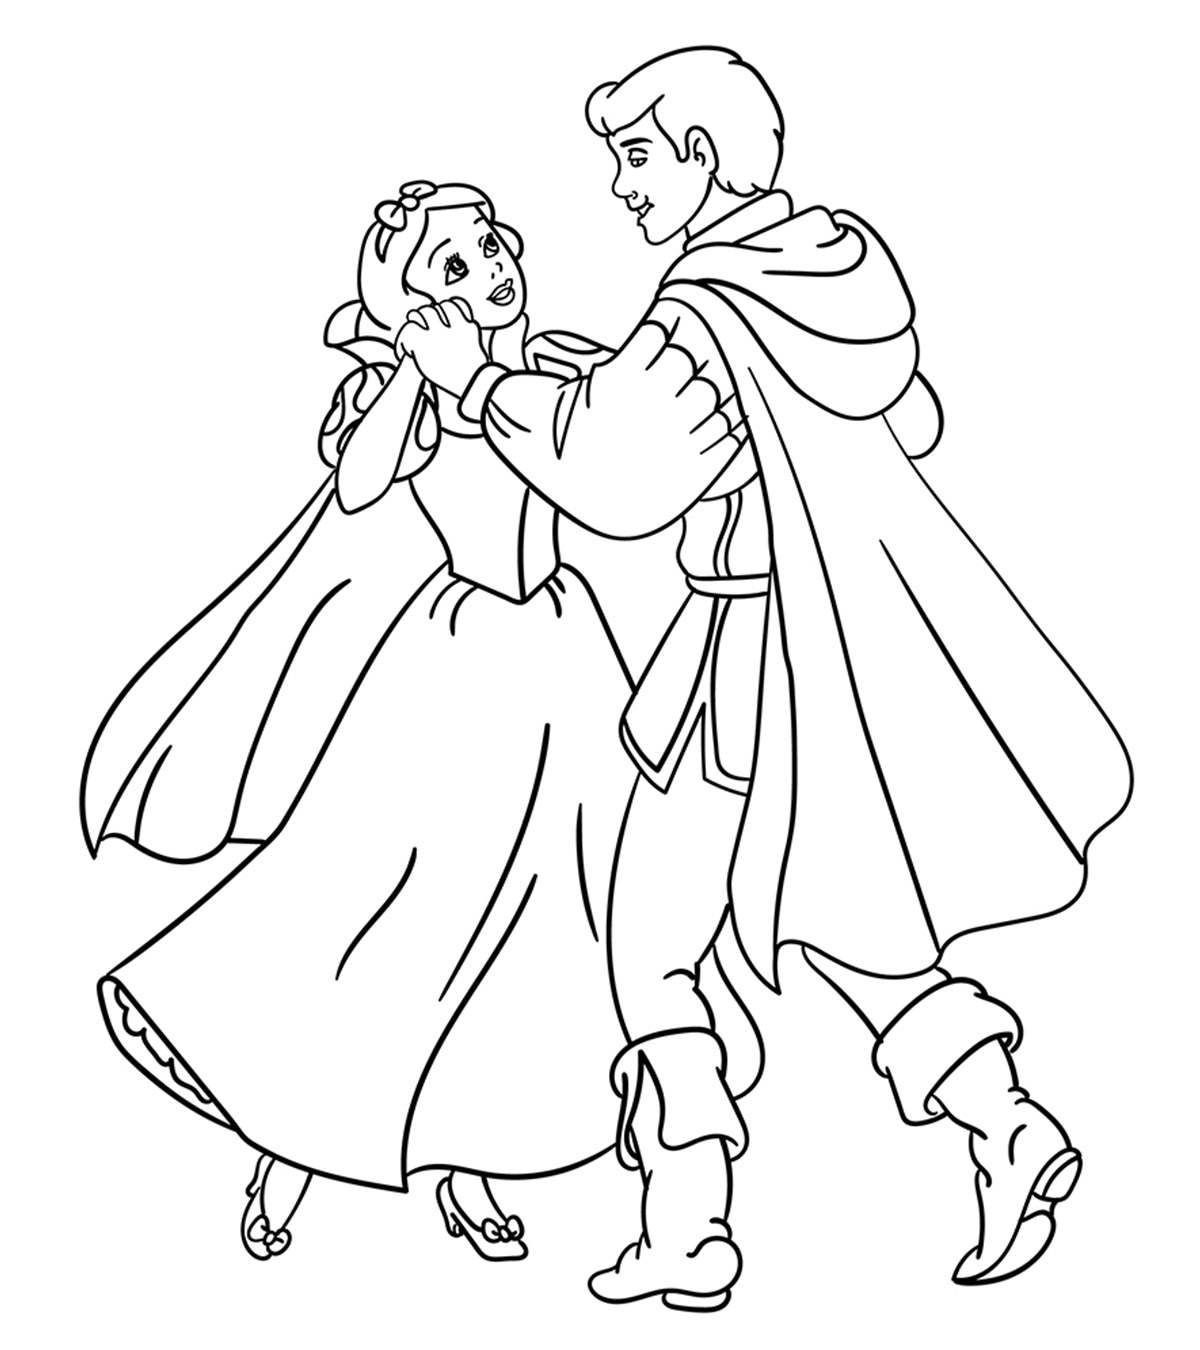 sleepy dwarf coloring pages